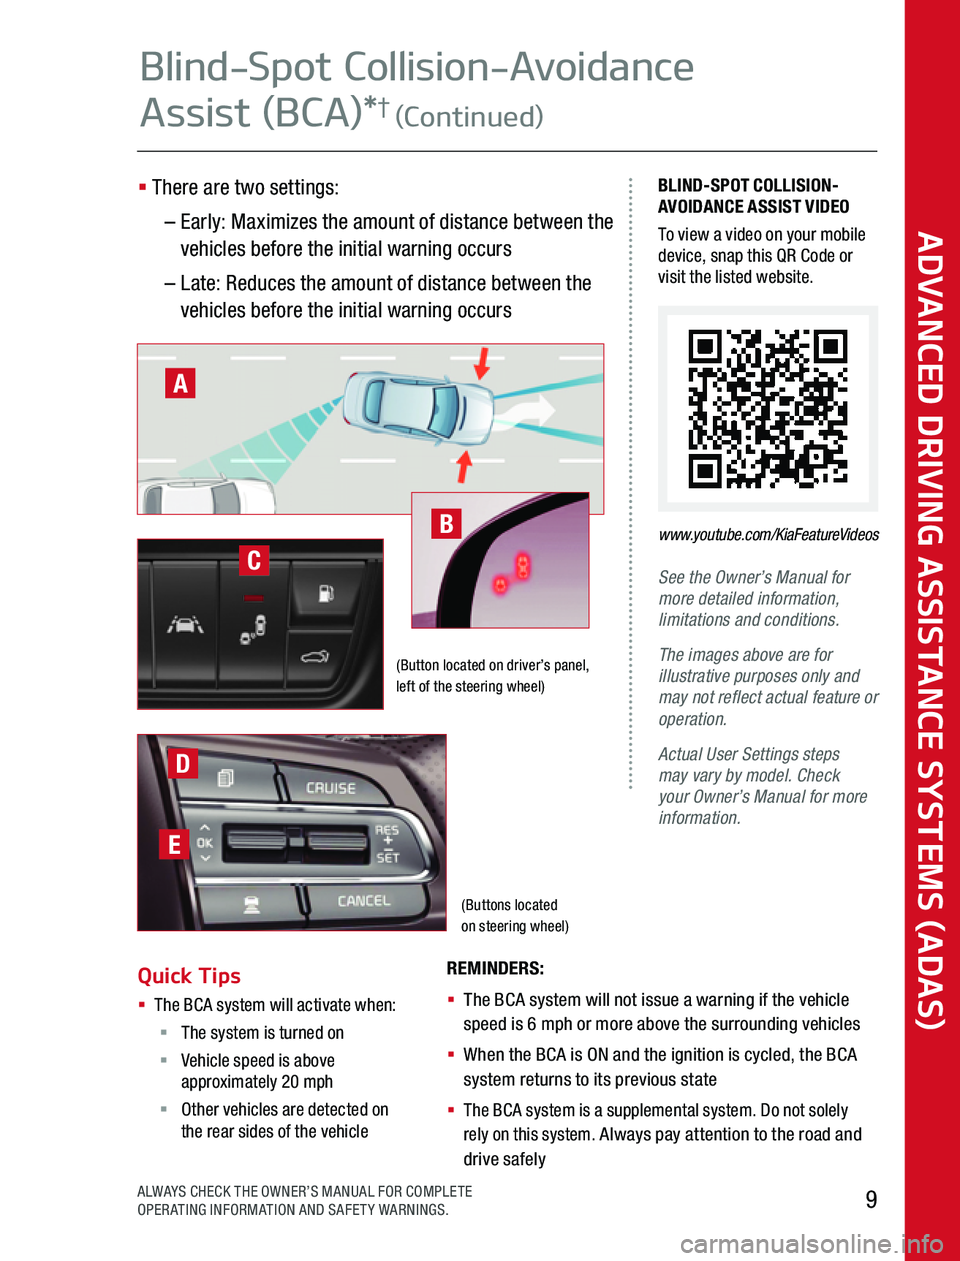 KIA SORENTO 2020  Advanced Driving Assistance System (Buttons located  on steering wheel)
BLIND-SPOT COLLISION-AVOIDANCE ASSIST VIDEOTo view a video on your mobile device, snap this QR Code or visit the listed website  
See the Owner’s Manual for more